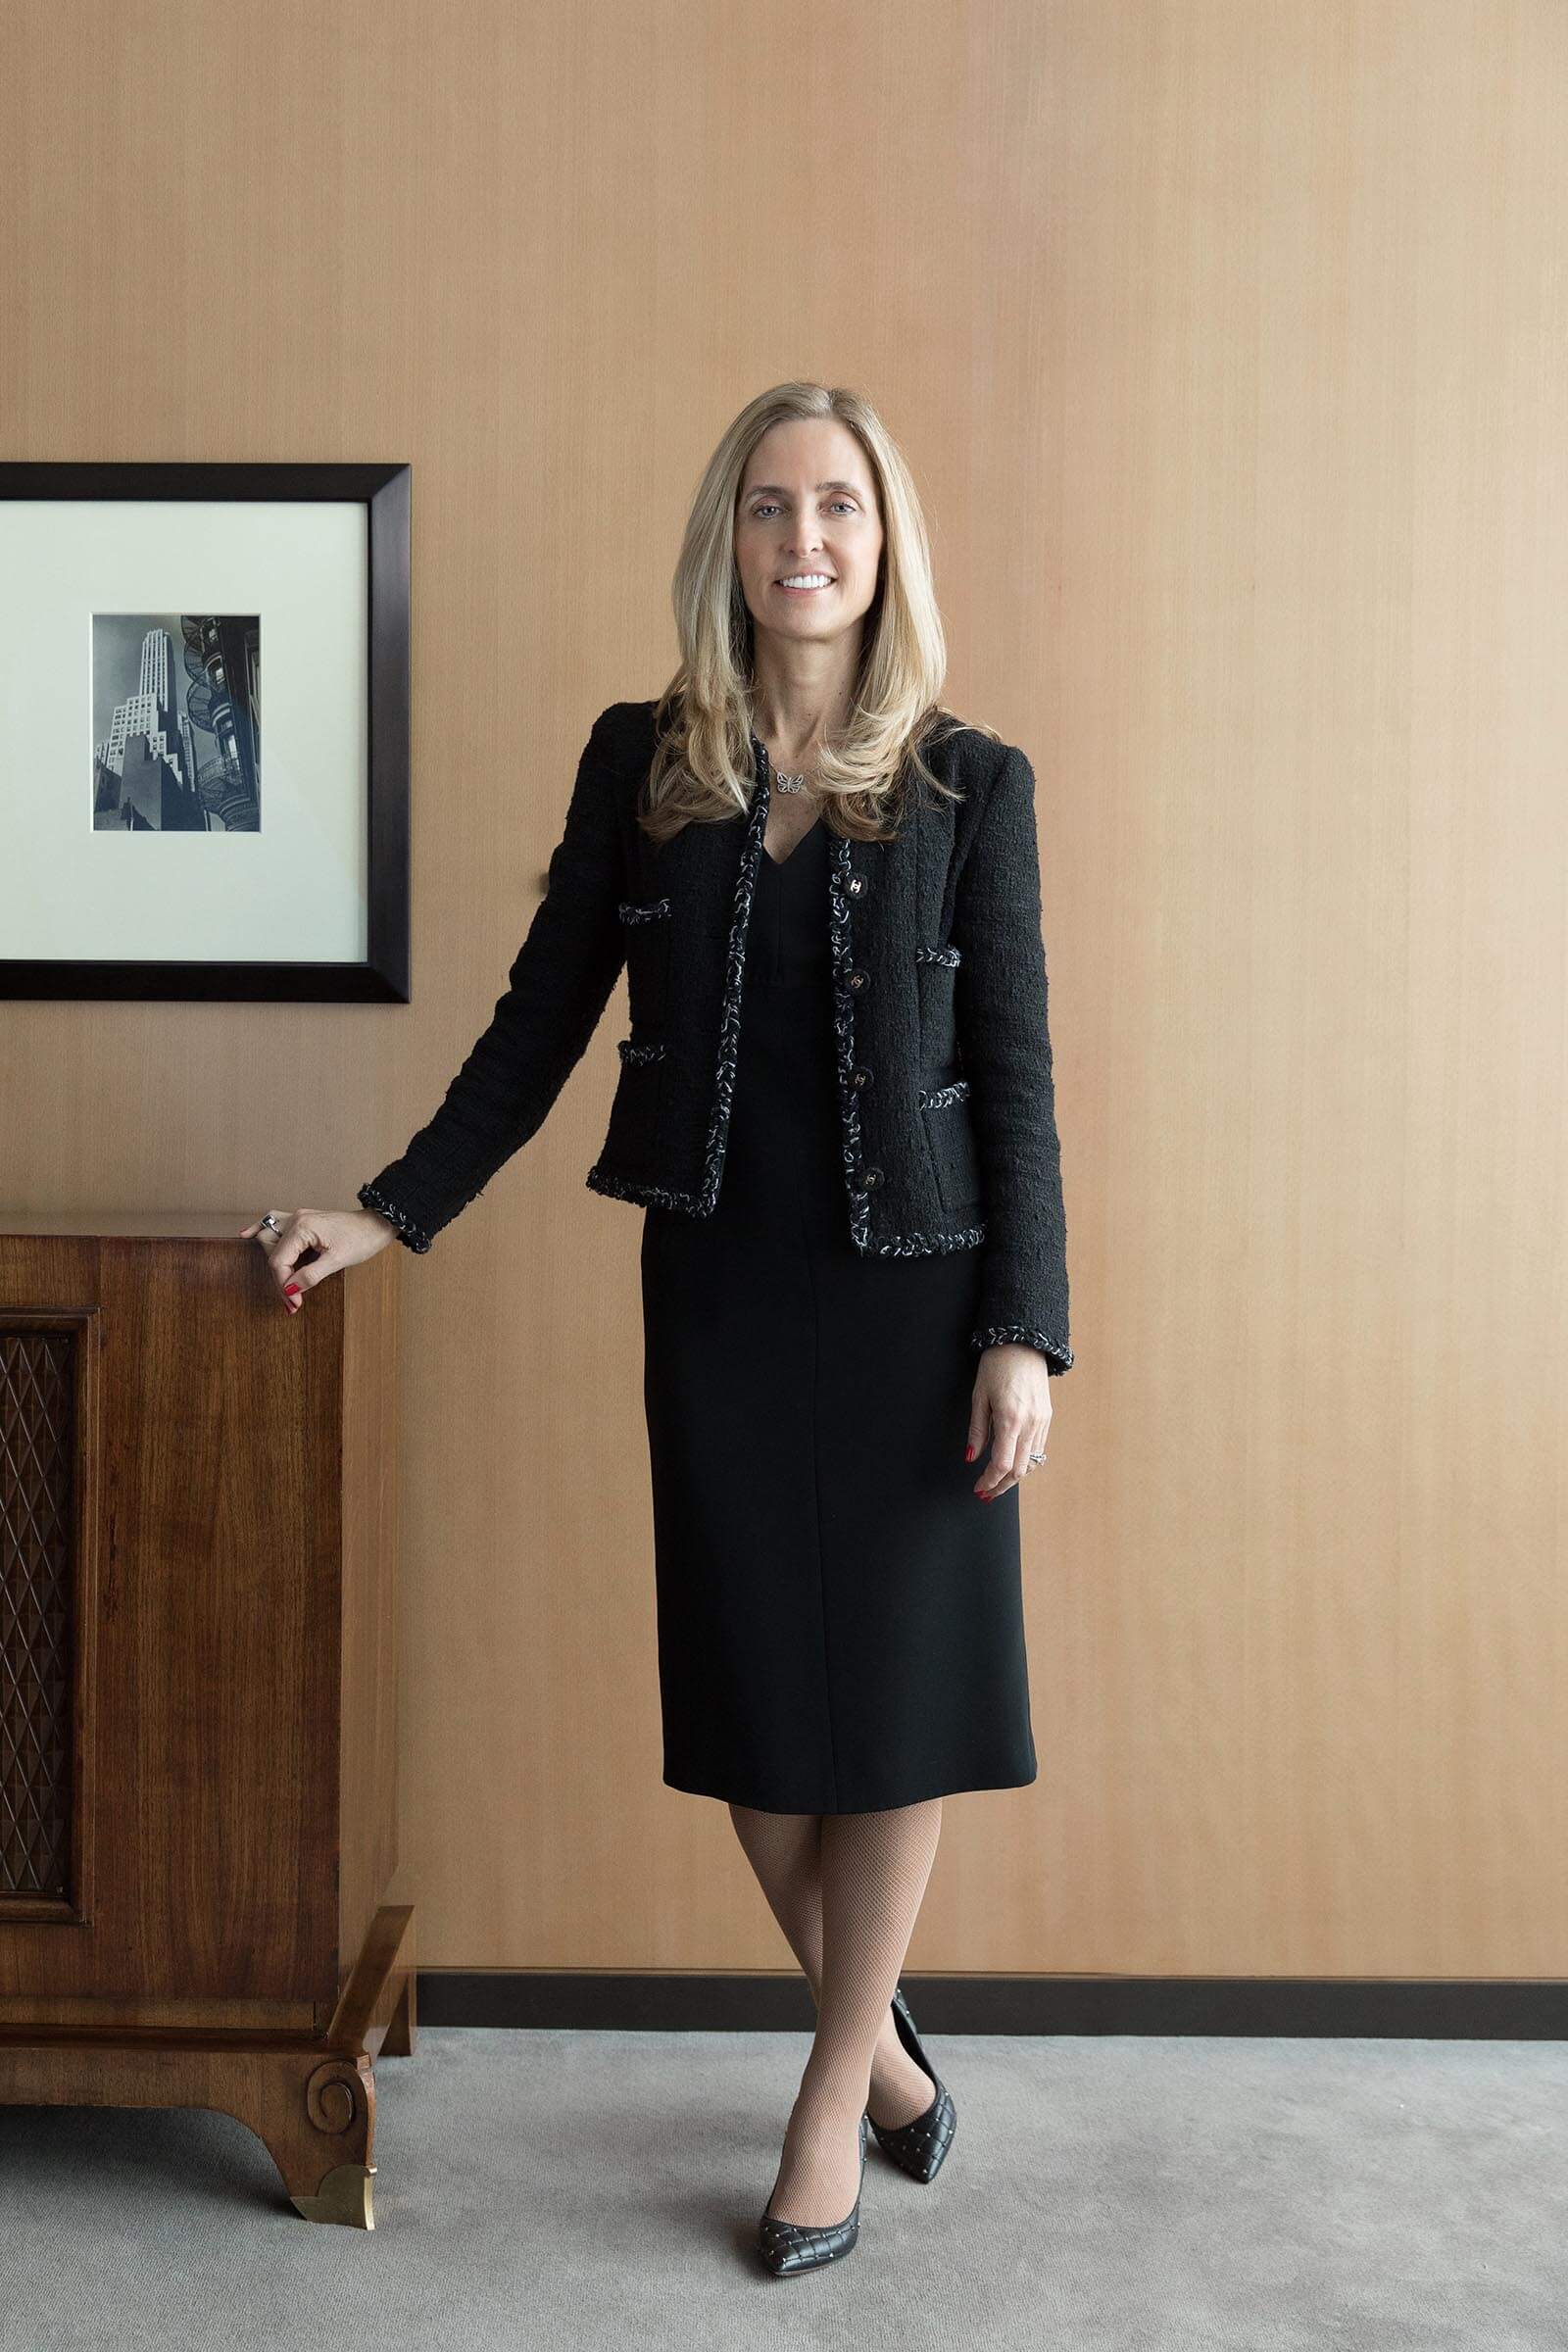 Claire Blessing - Managing Director, 
Client Wealth Management